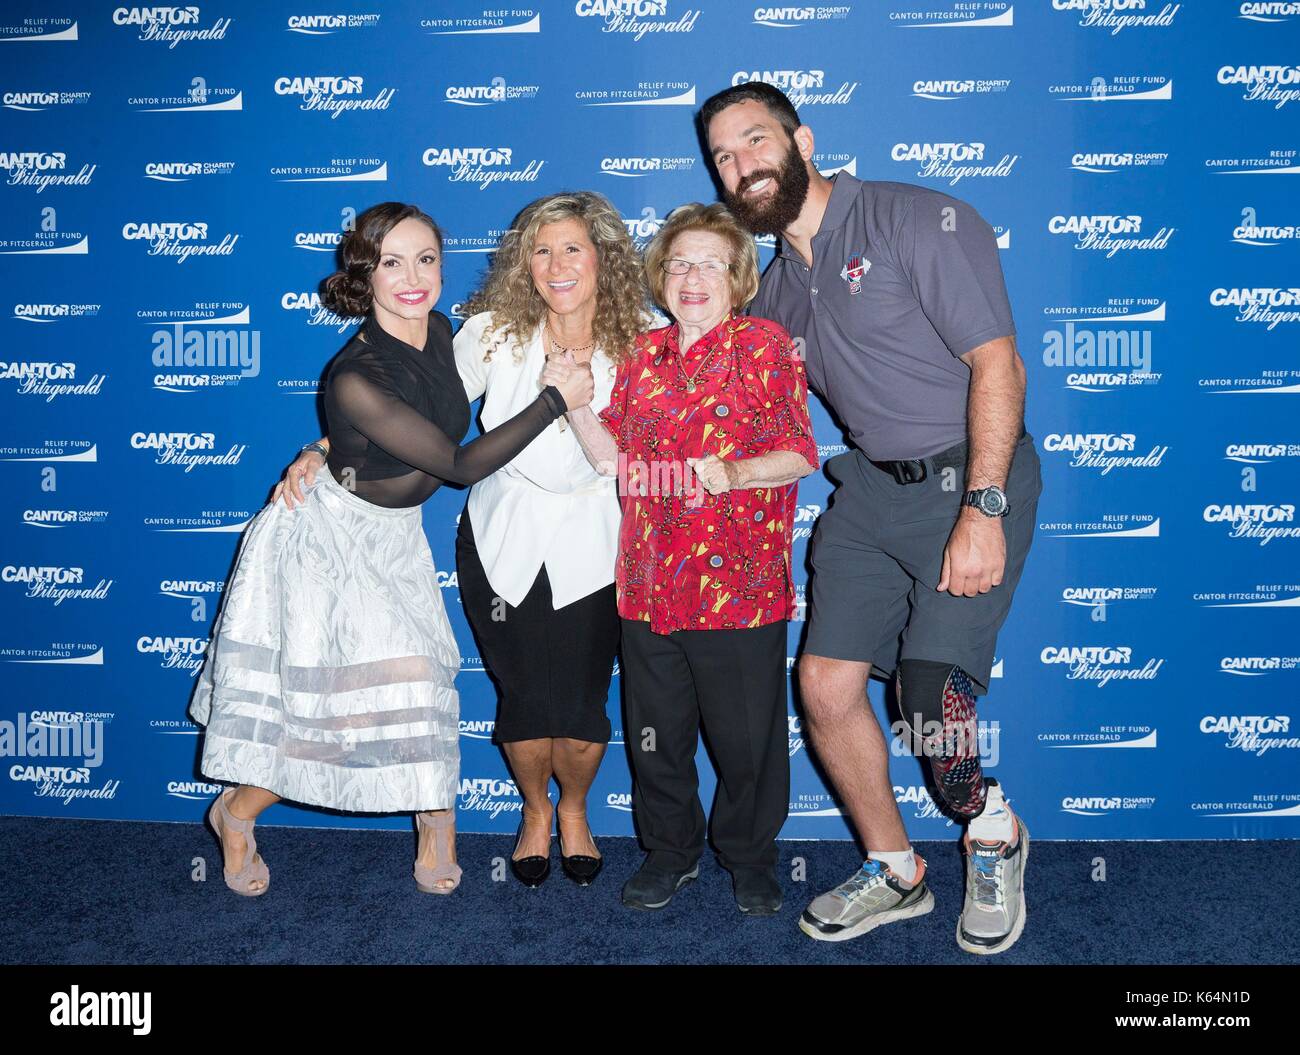 Erica Hill , Edie Lutnick, Dr. Ruth Westheimer, Redmond Ramos in attendance for Cantor Fitzgerald Annual Charity Day, Cantor Fitzgerald, New York, NY September 11, 2017. Photo By: Lev Radin/Everett Collection Stock Photo